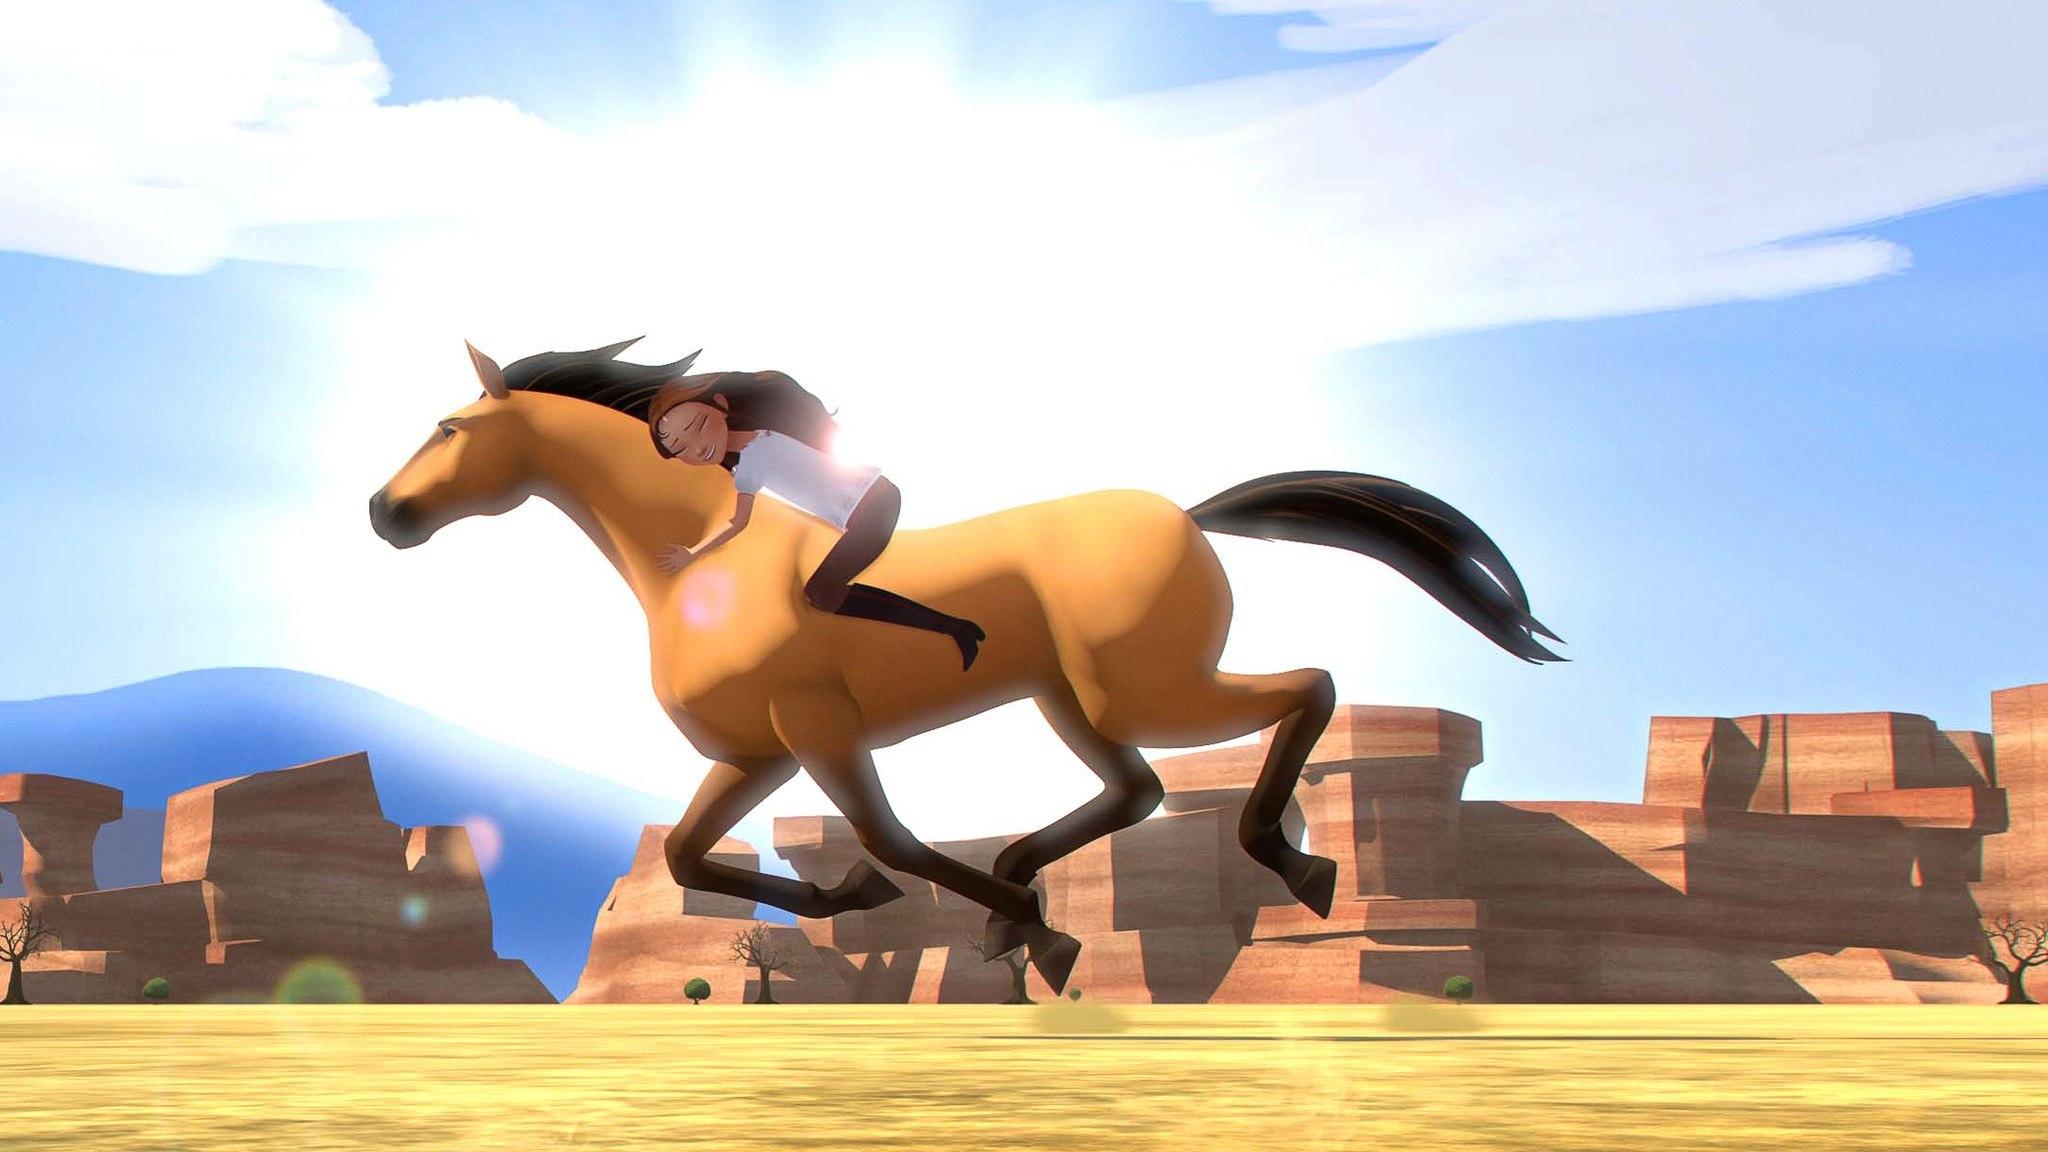 First Look: DreamWorks Animation's 'Spirit Riding Free' Headed to